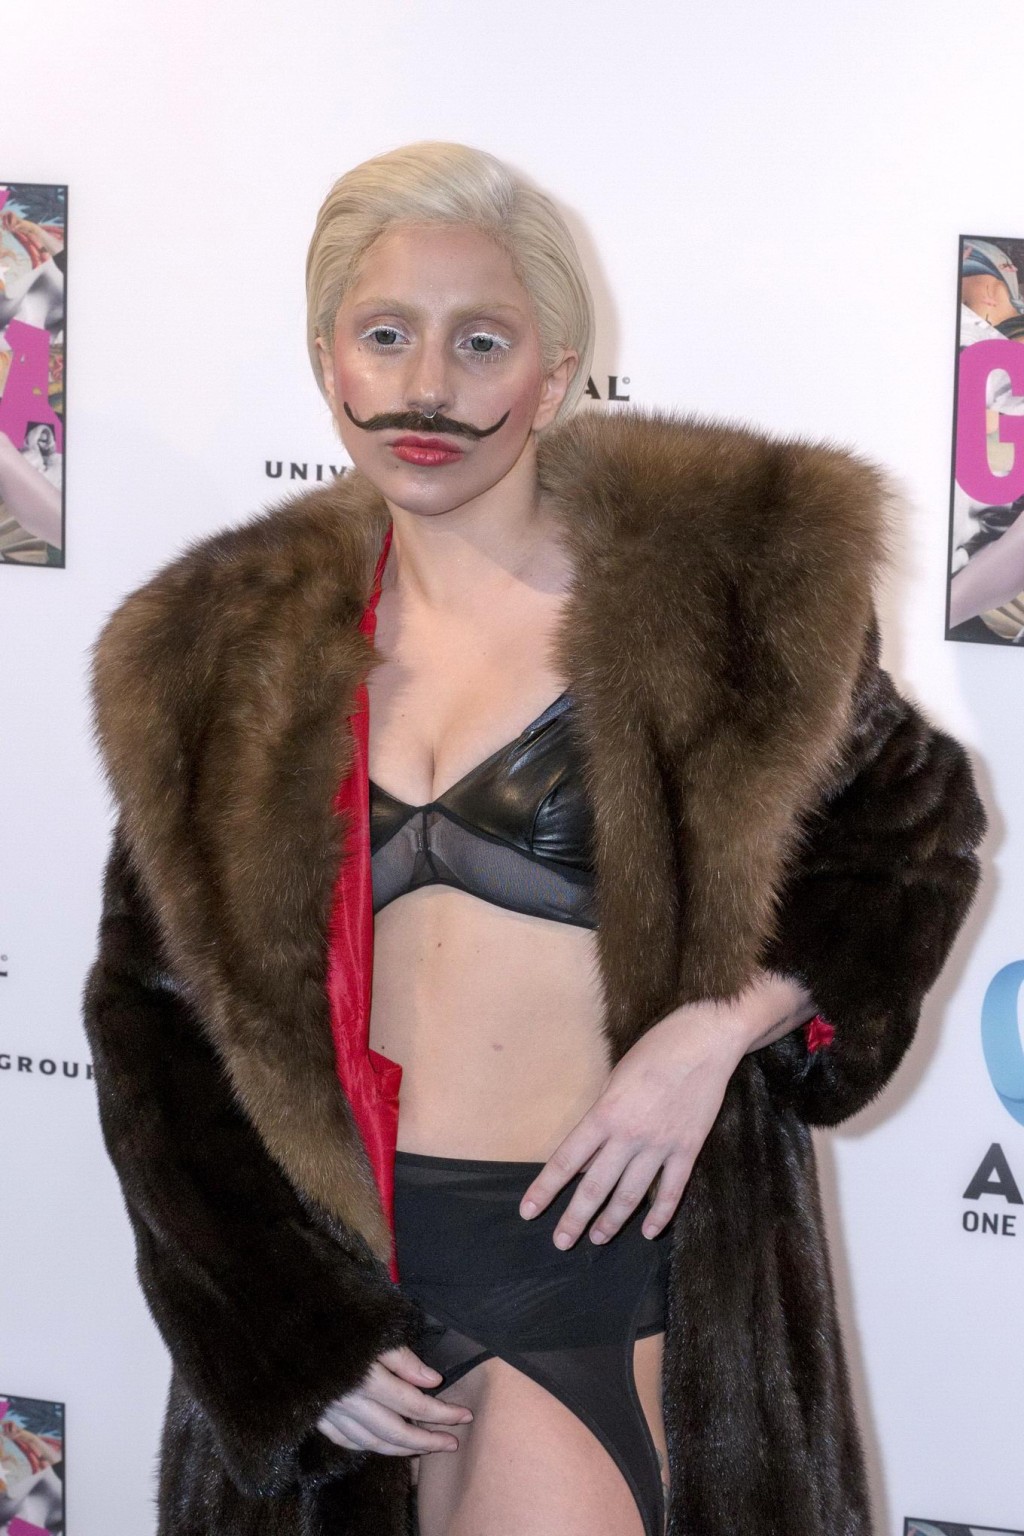 Lady Gaga wearing lingerie and fake moustache at her album promotion in Berlin #75215064